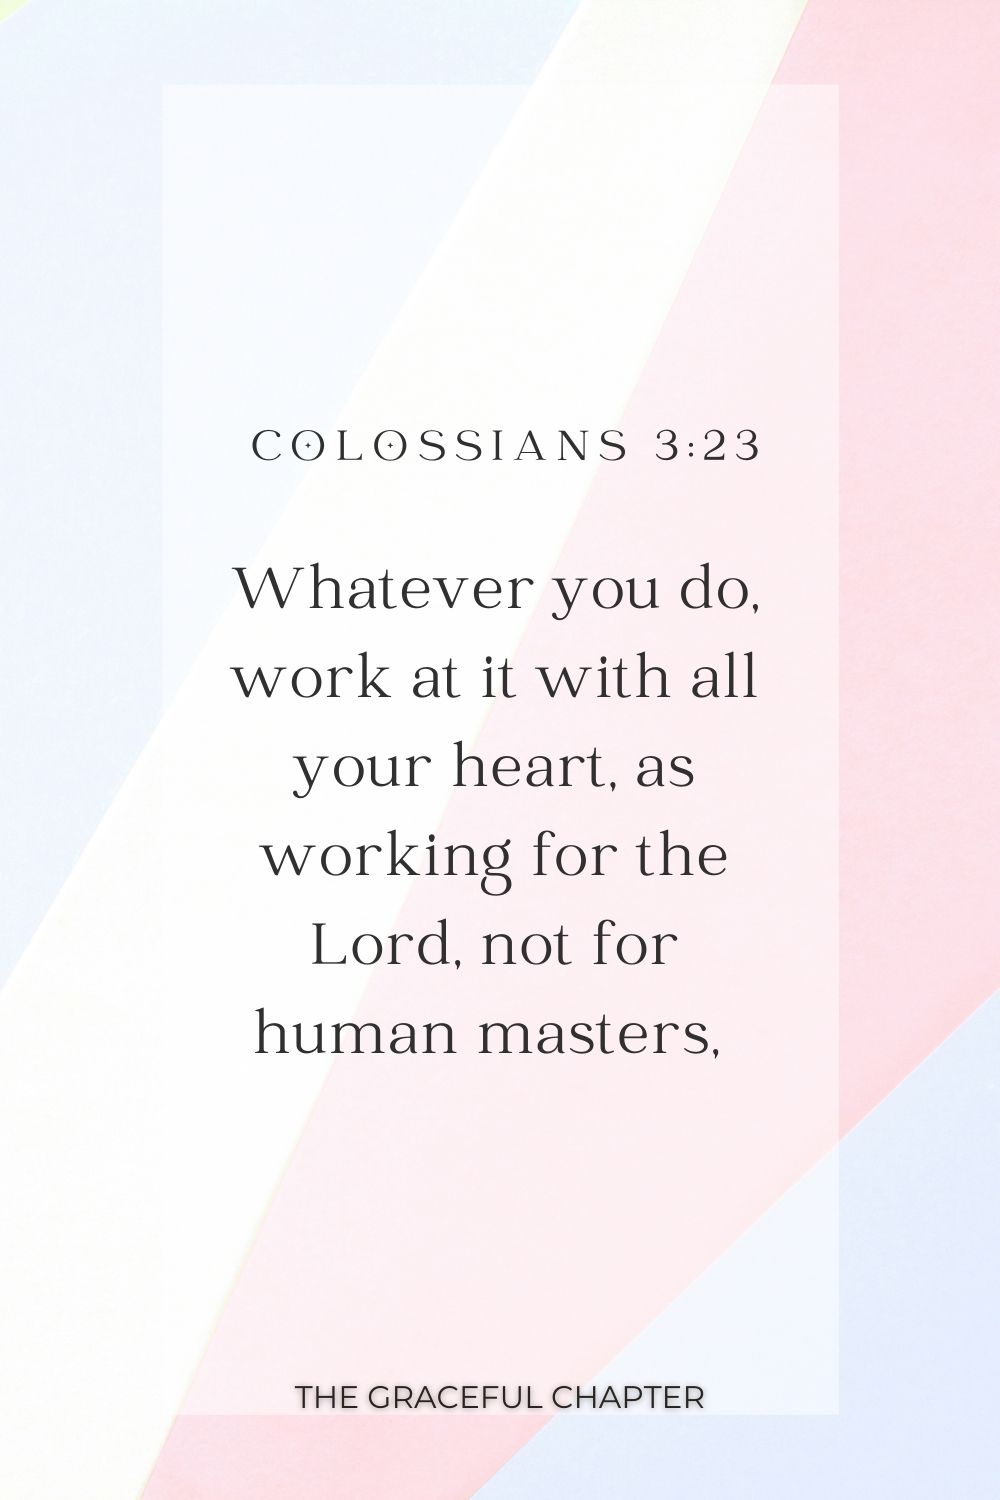 Whatever you do, work at it with all your heart, as working for the Lord, not for human masters,  Colossians 3:23